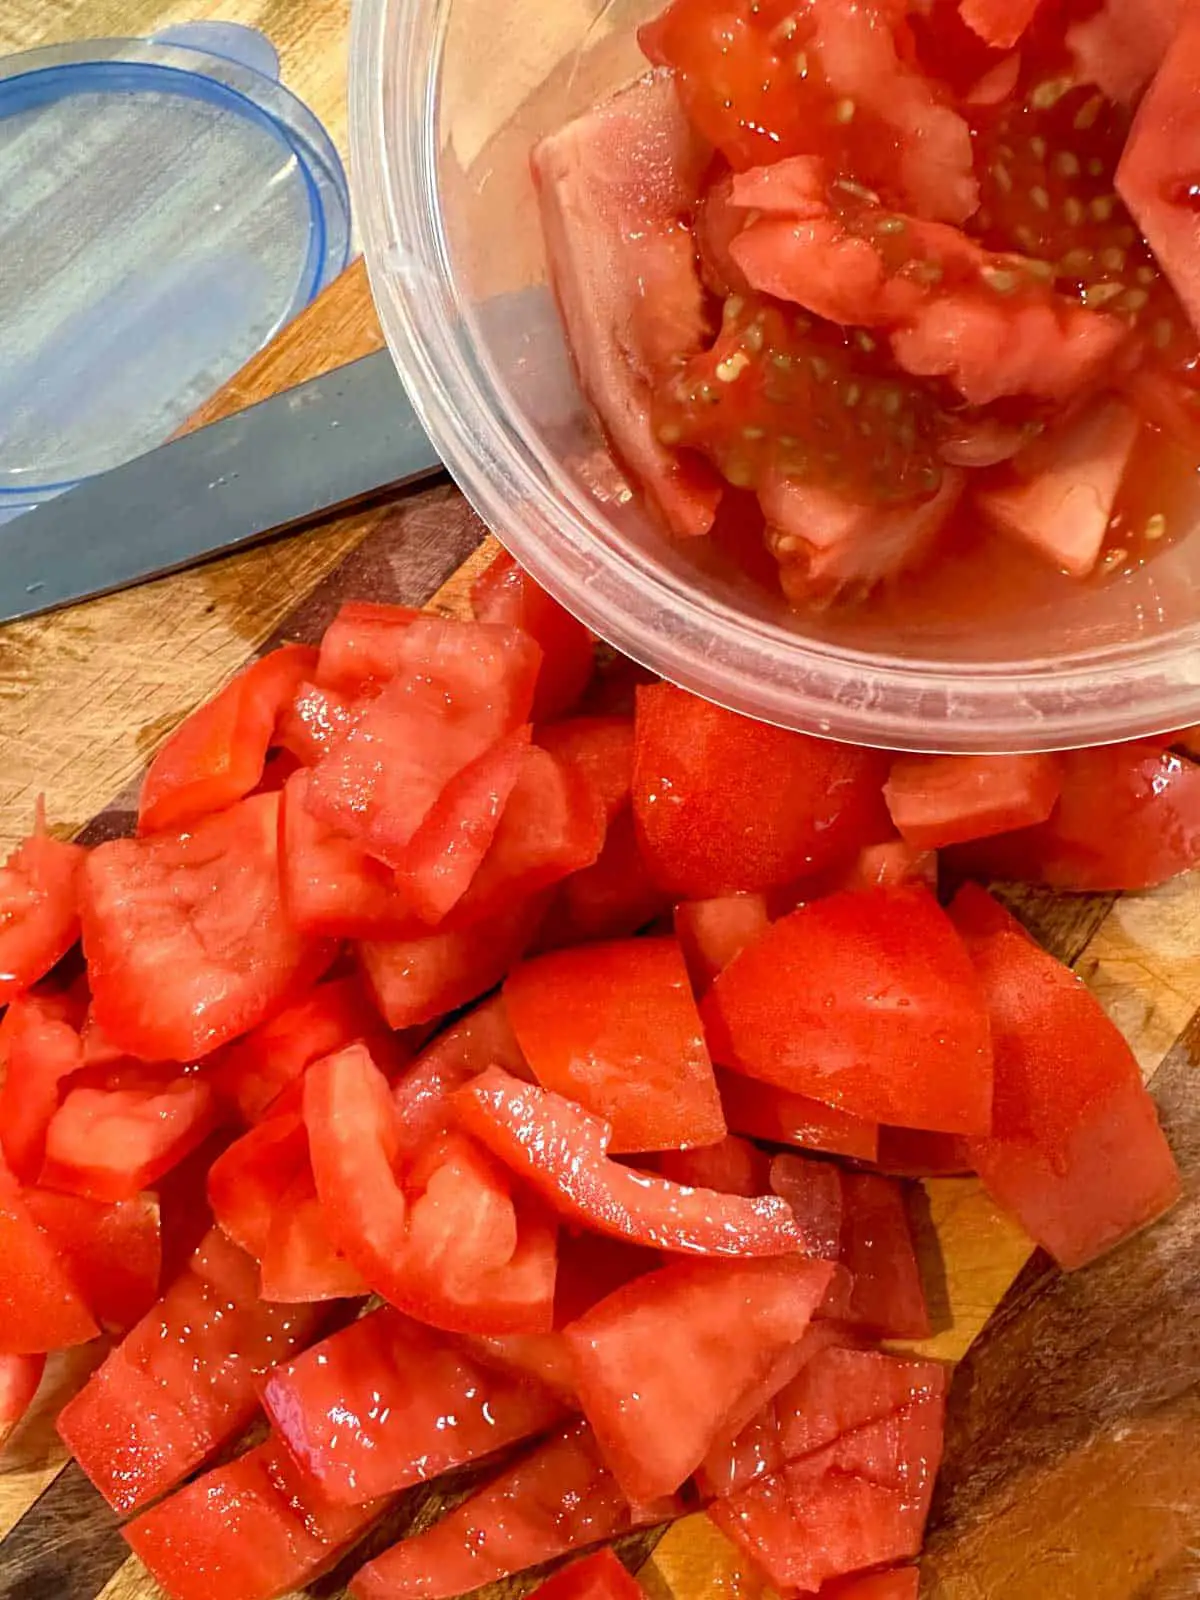 Diced tomatoes on a wooden cutting board. There is a small plastic bowl with the insides of the tomatoes in the bowl, and a blue lid for the bowl and a knife in the background.